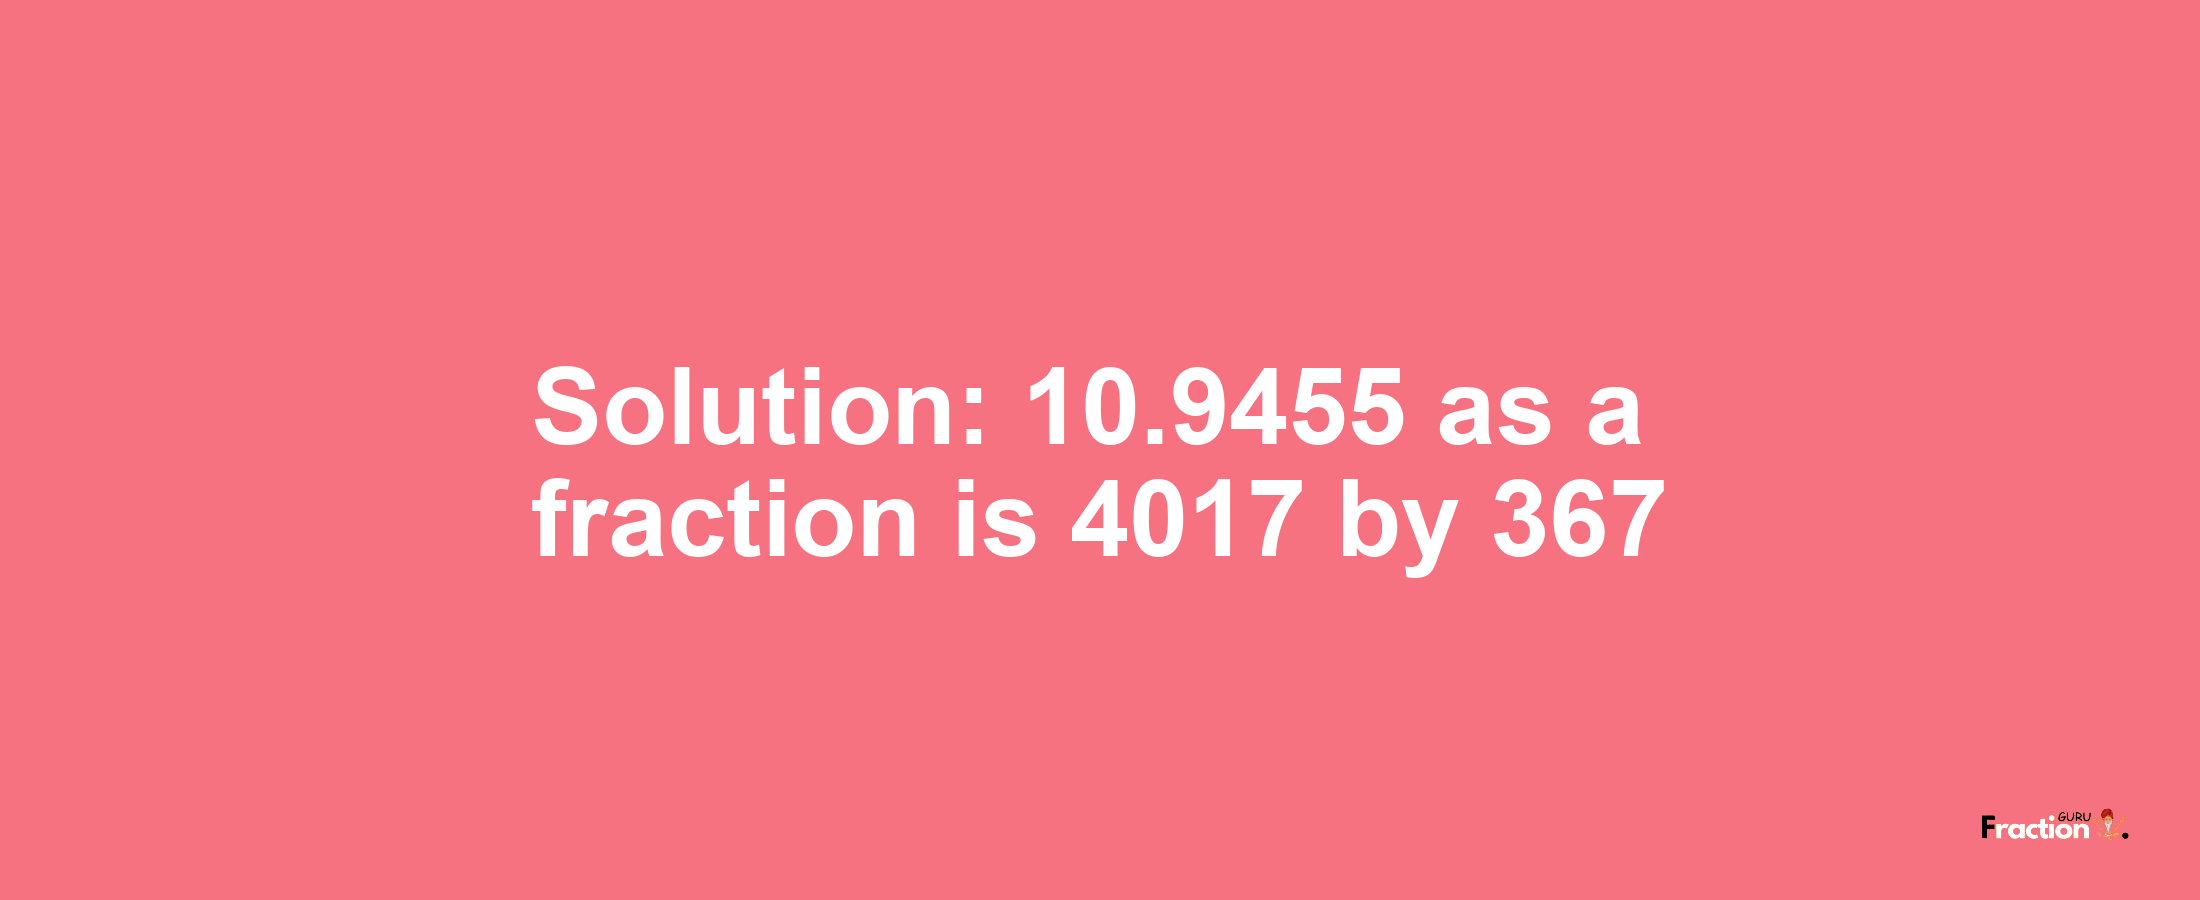 Solution:10.9455 as a fraction is 4017/367